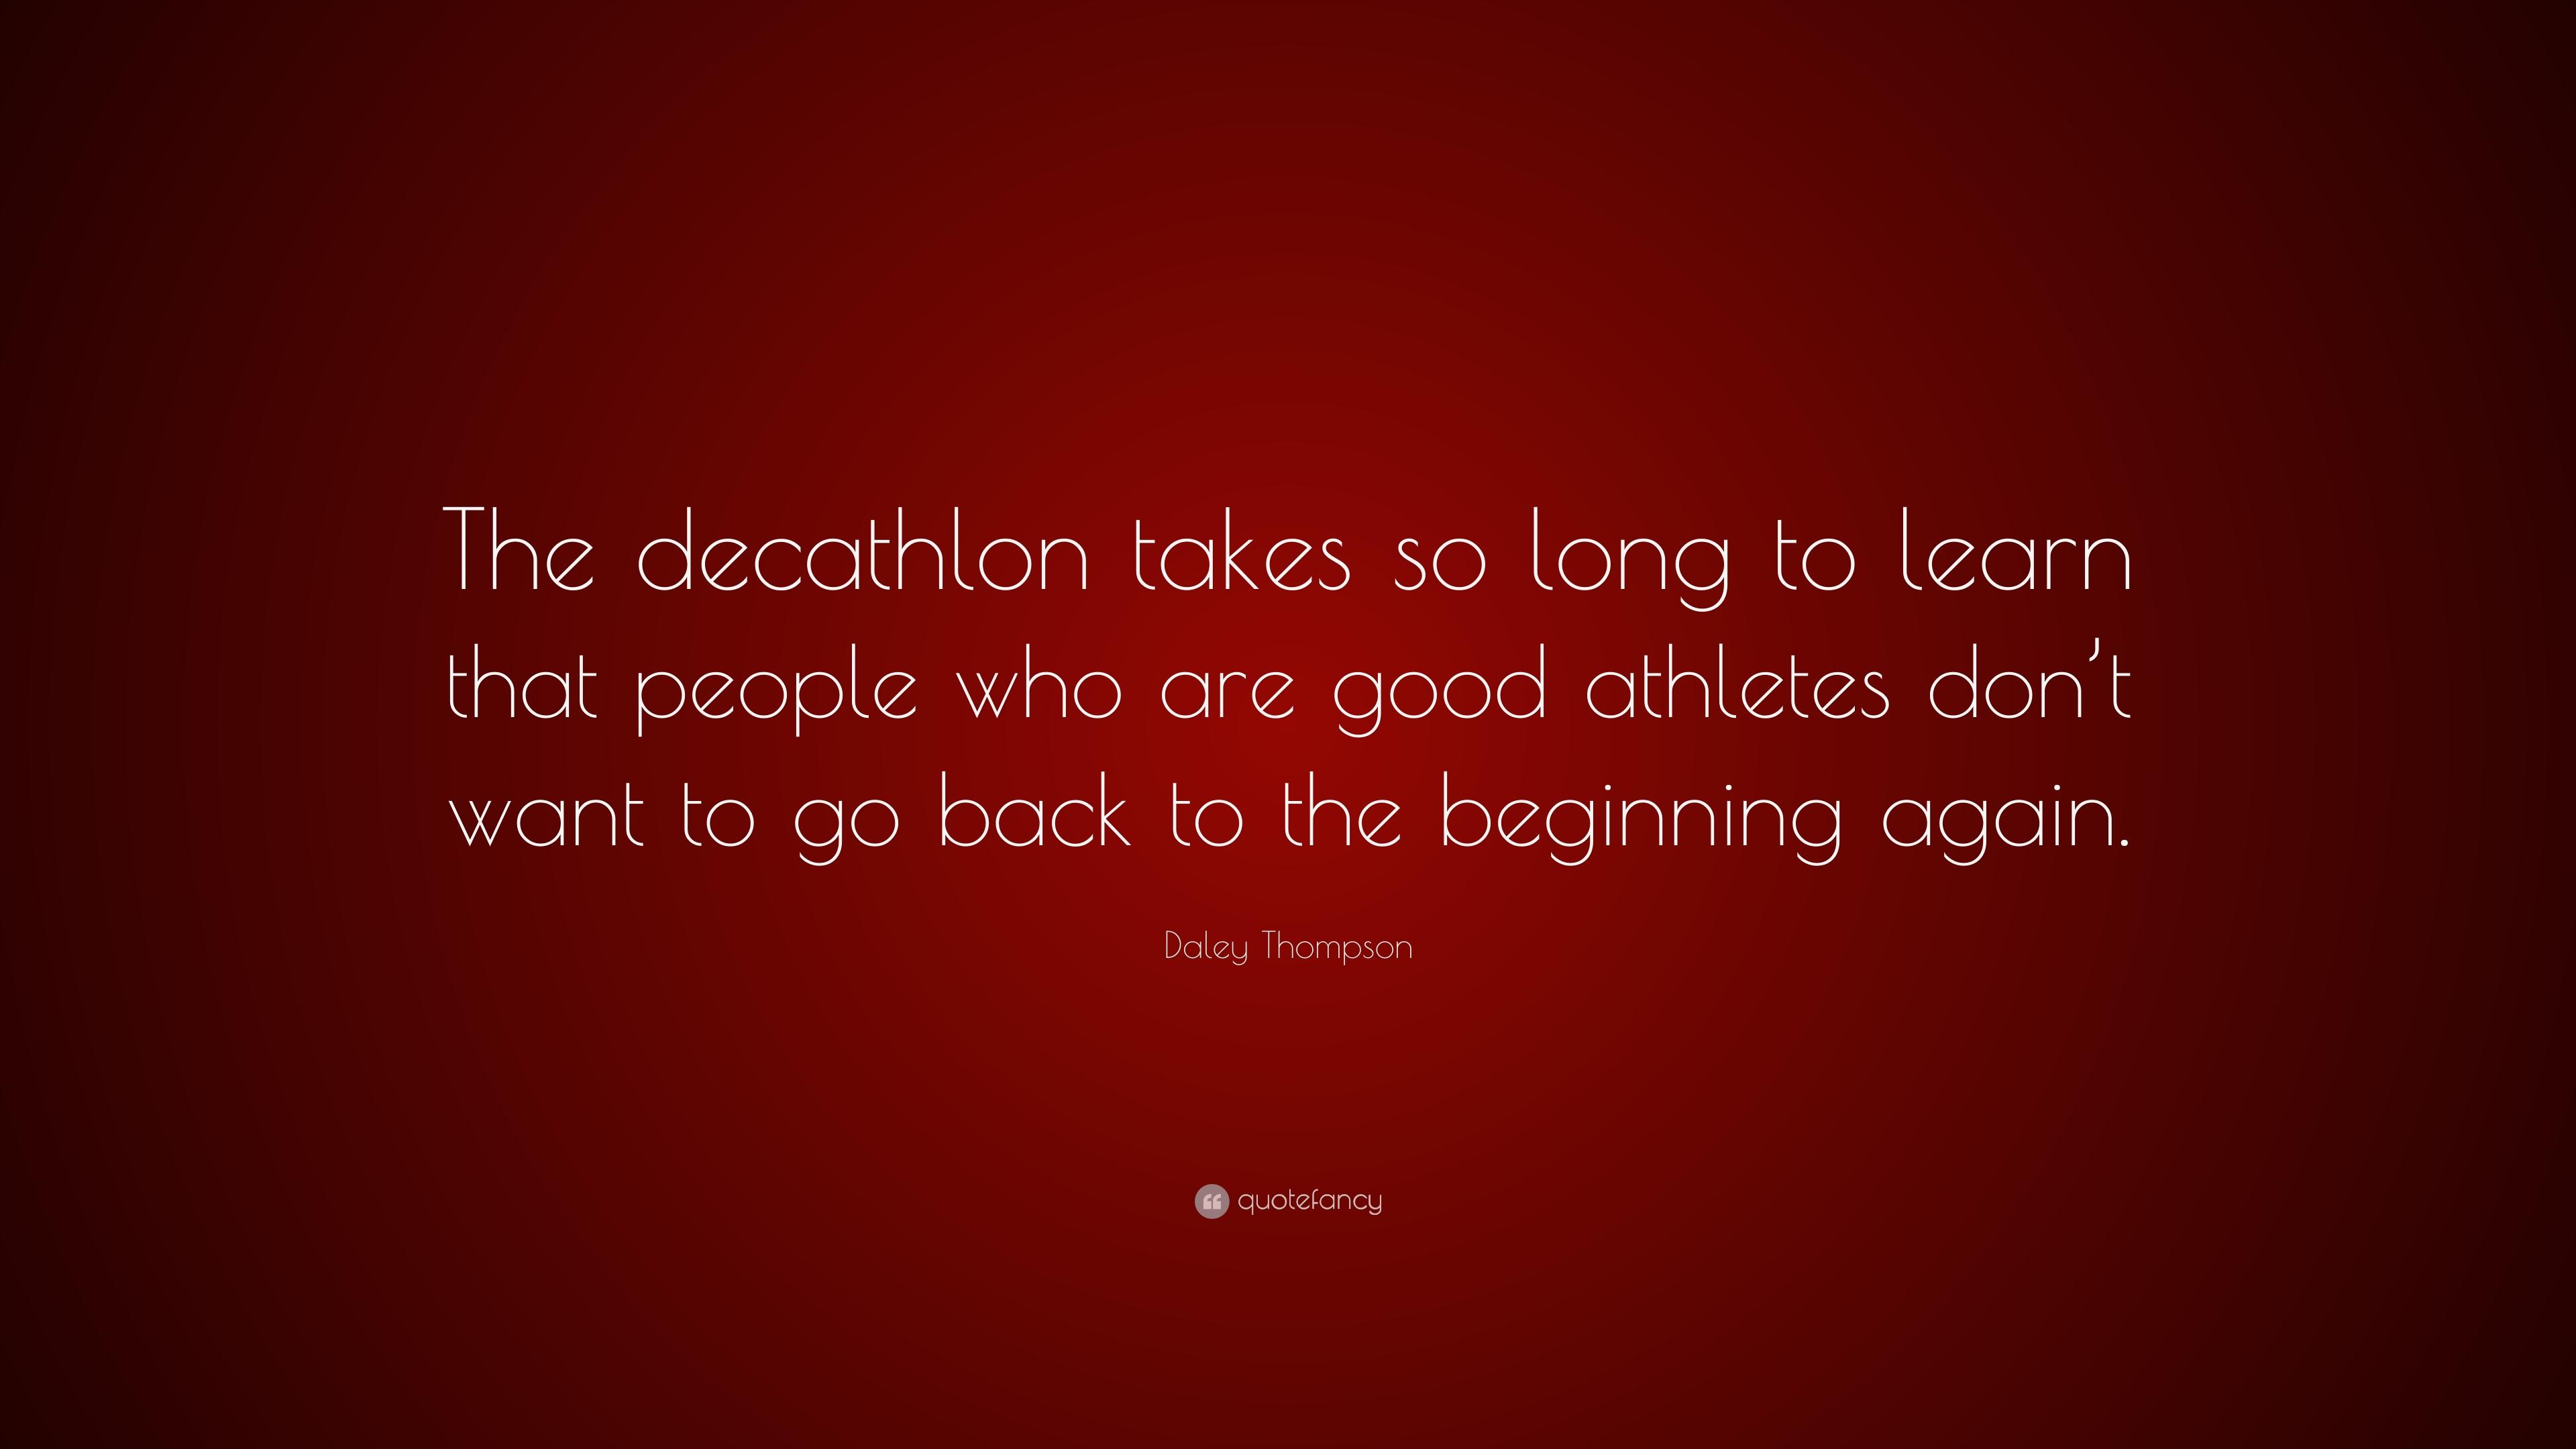 Daley Thompson Quote: “The decathlon takes so long to learn that